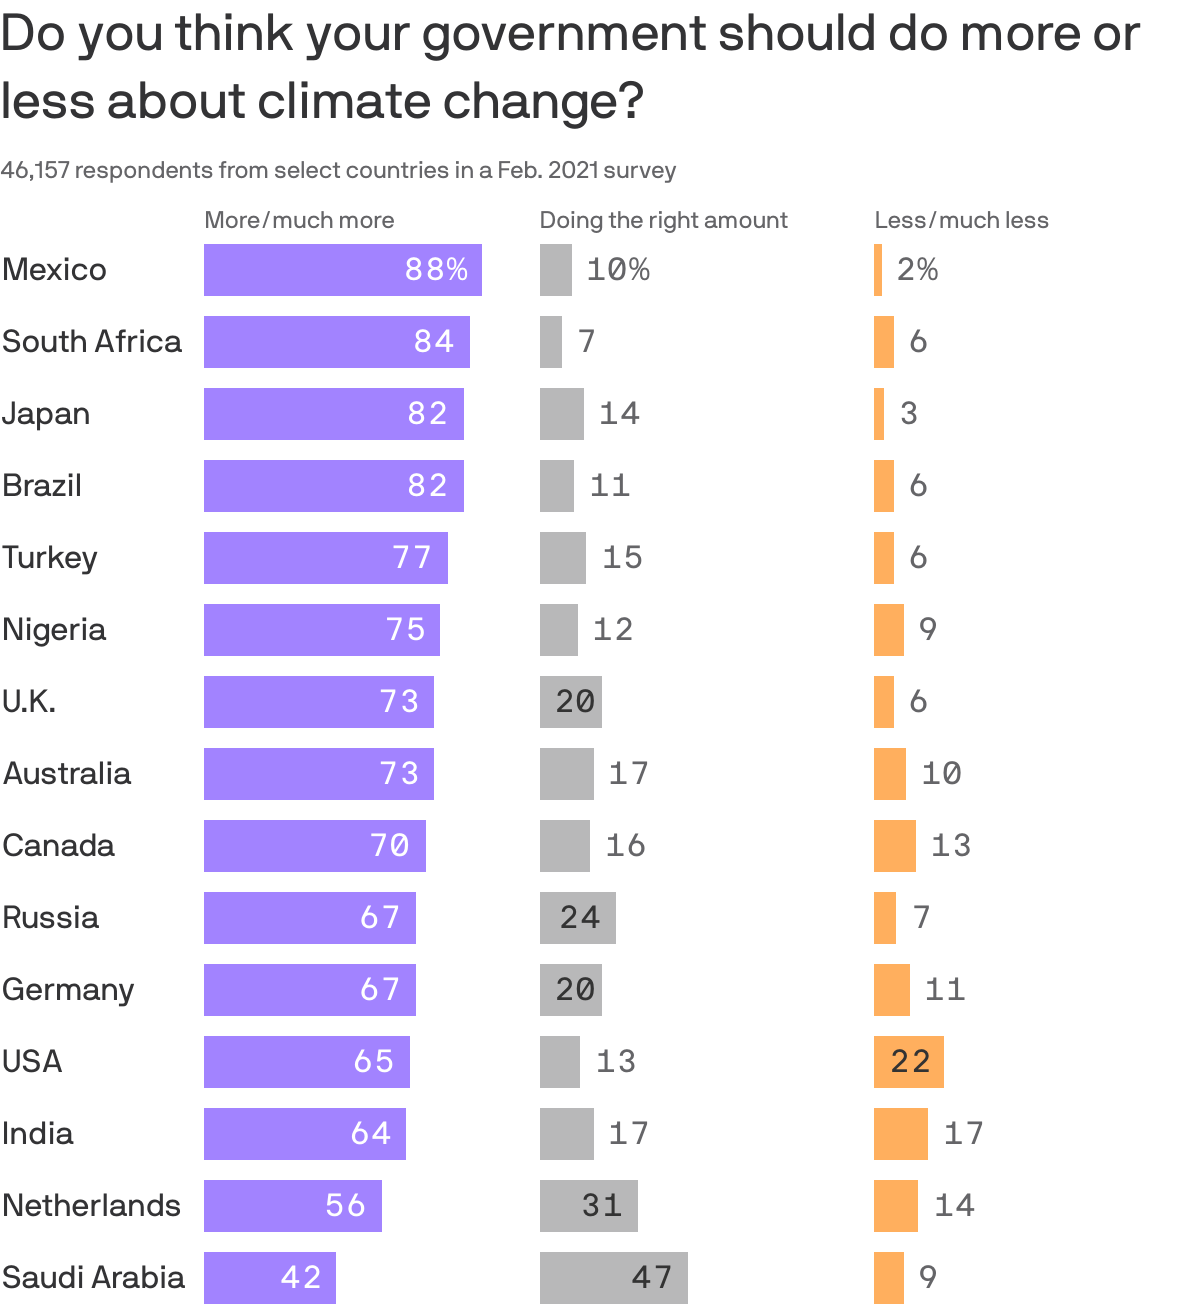 Do you think your government should do more or less about climate change?